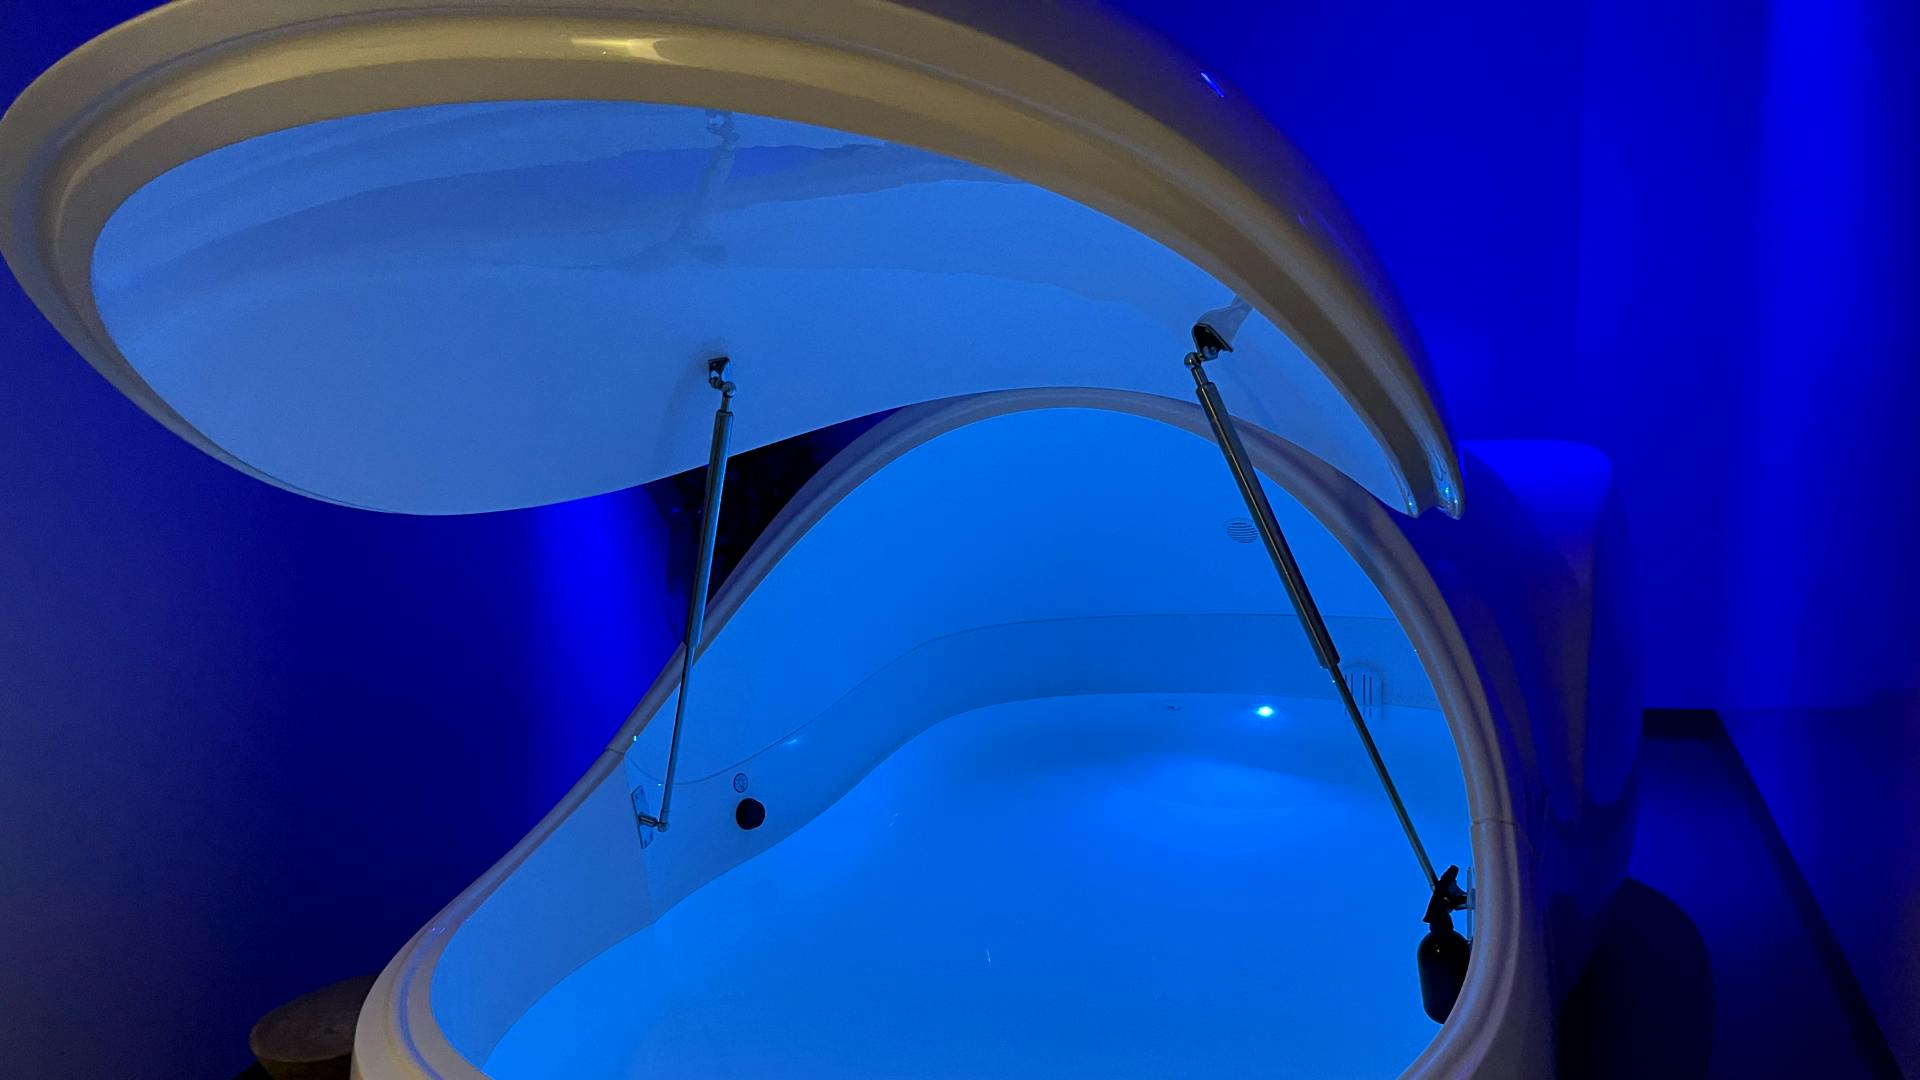 A sensory deprivation tank. The tank is open and it is filled with water. The tank is lit by light blue light.